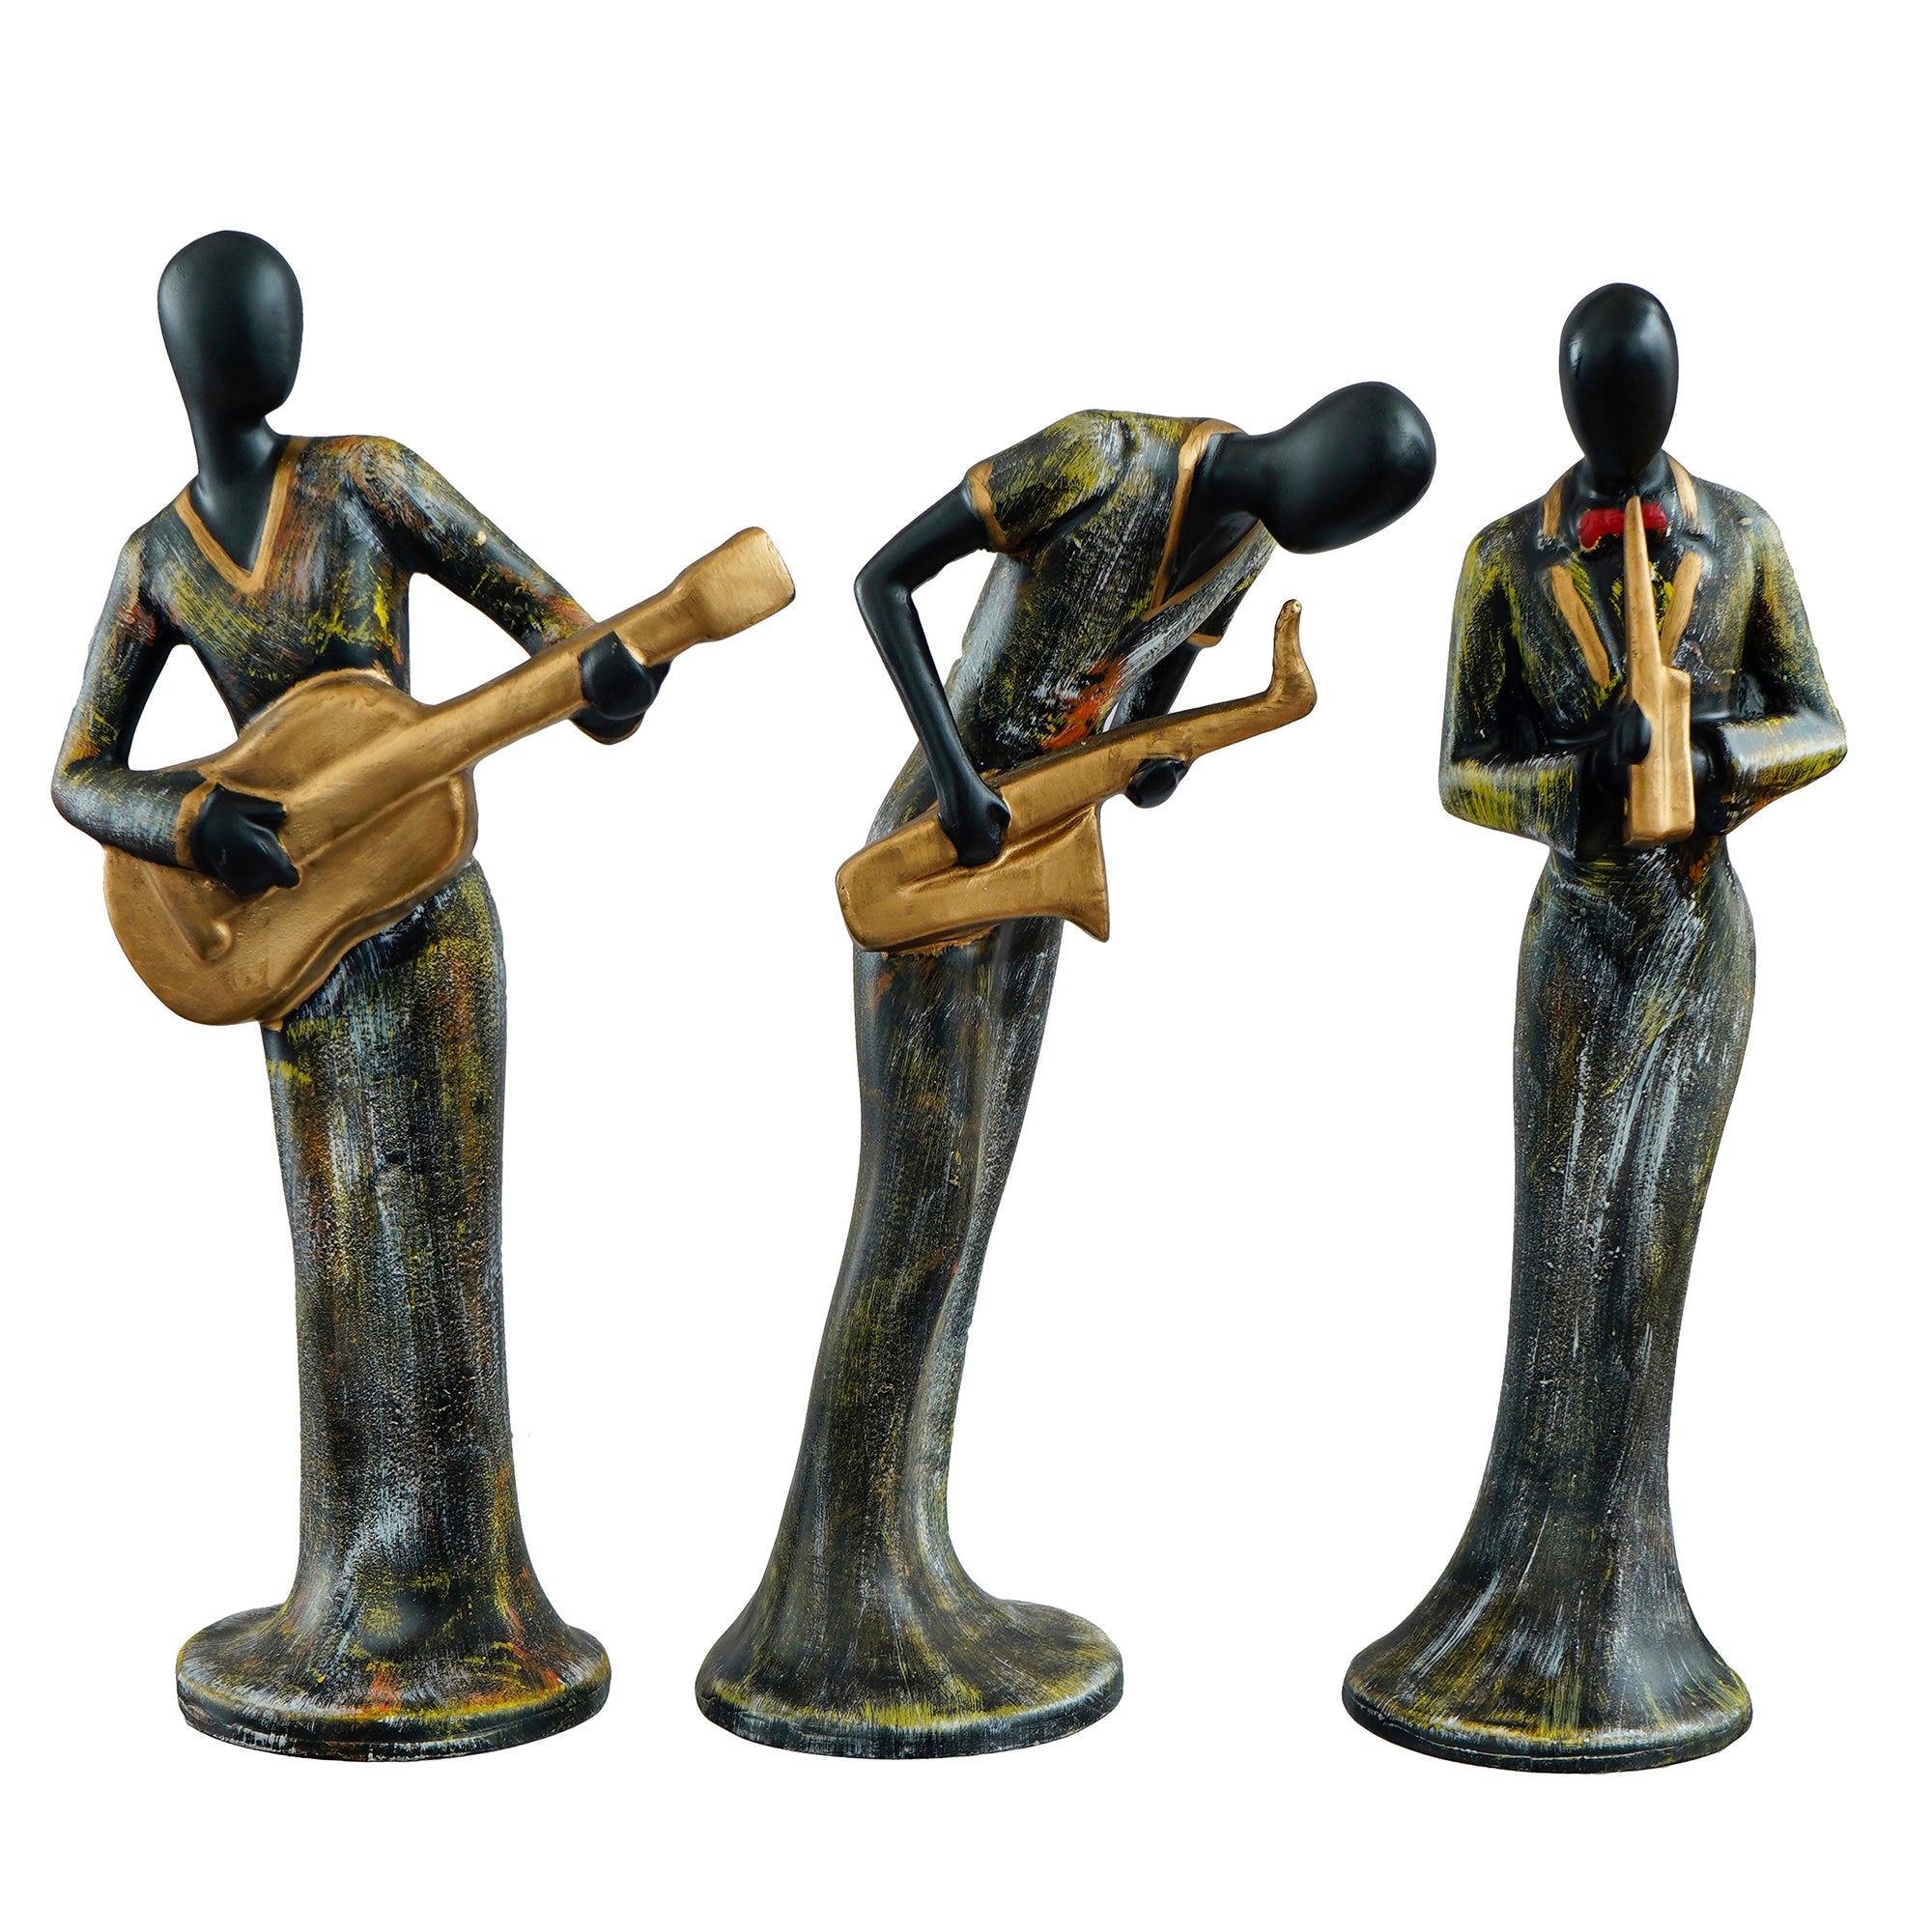 Grey and Black Polyresin Set of 3 Ladies figurines Playing Wind, Guitar,Saxophone Musical Instrument Handcrafted Decorative Showpiece 2